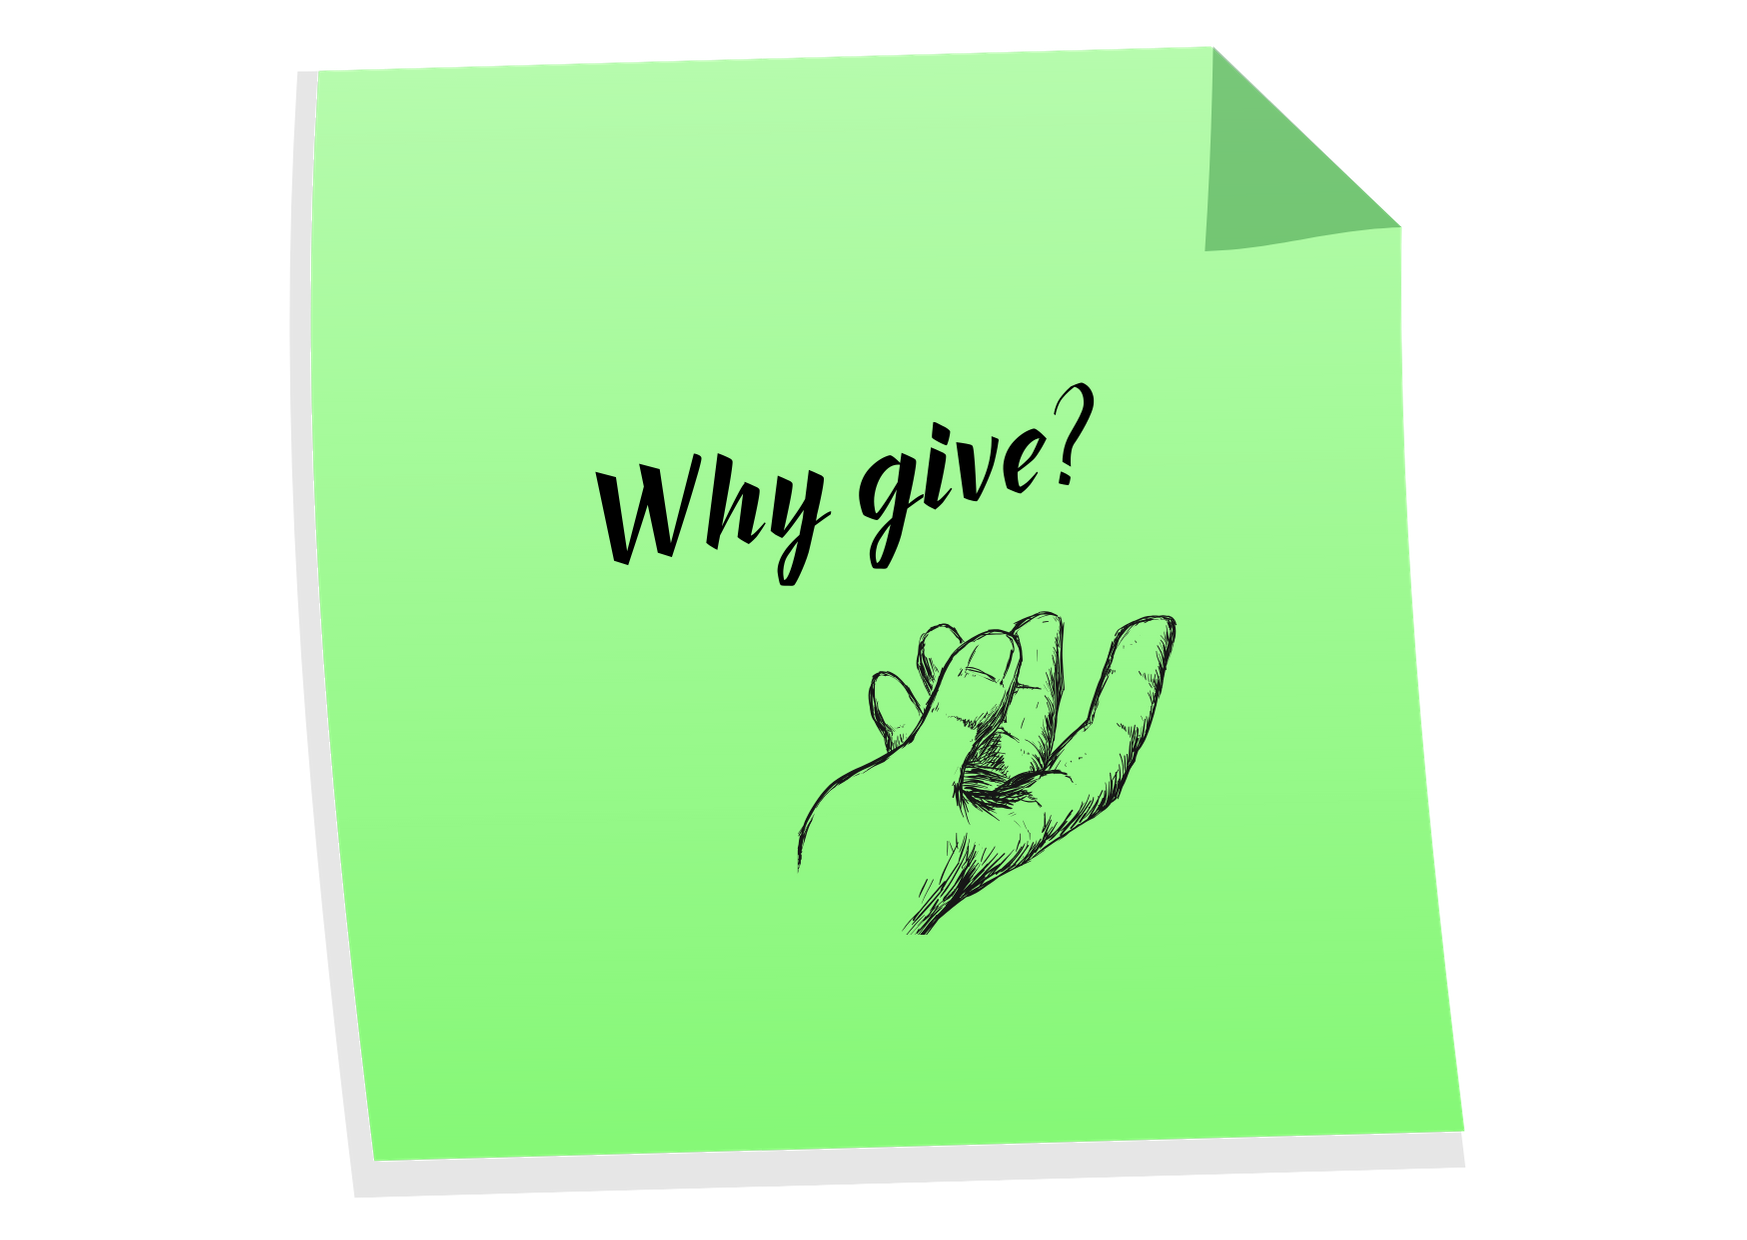 hands reaching and words: why give?